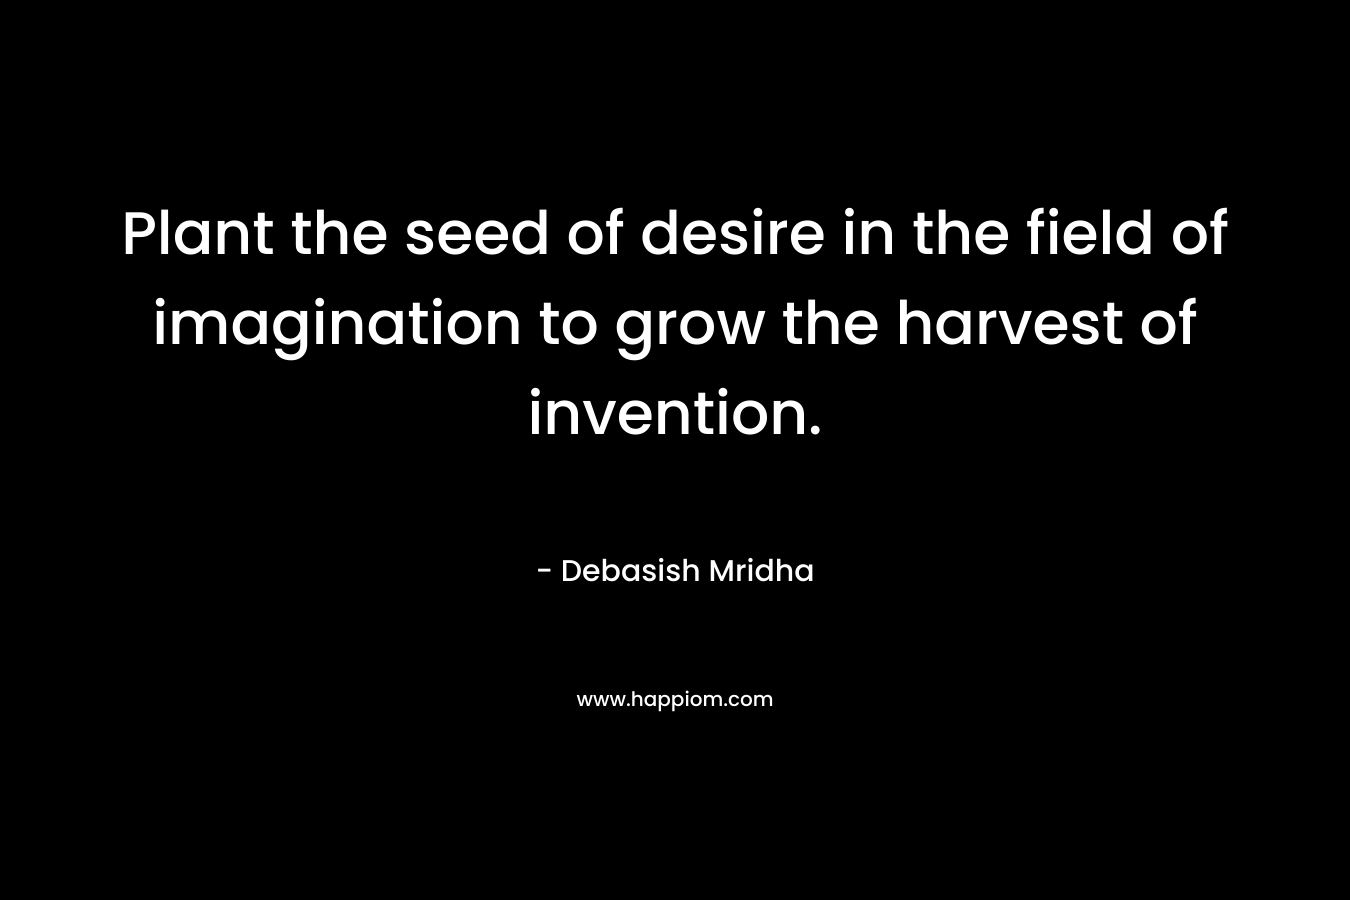 Plant the seed of desire in the field of imagination to grow the harvest of invention.